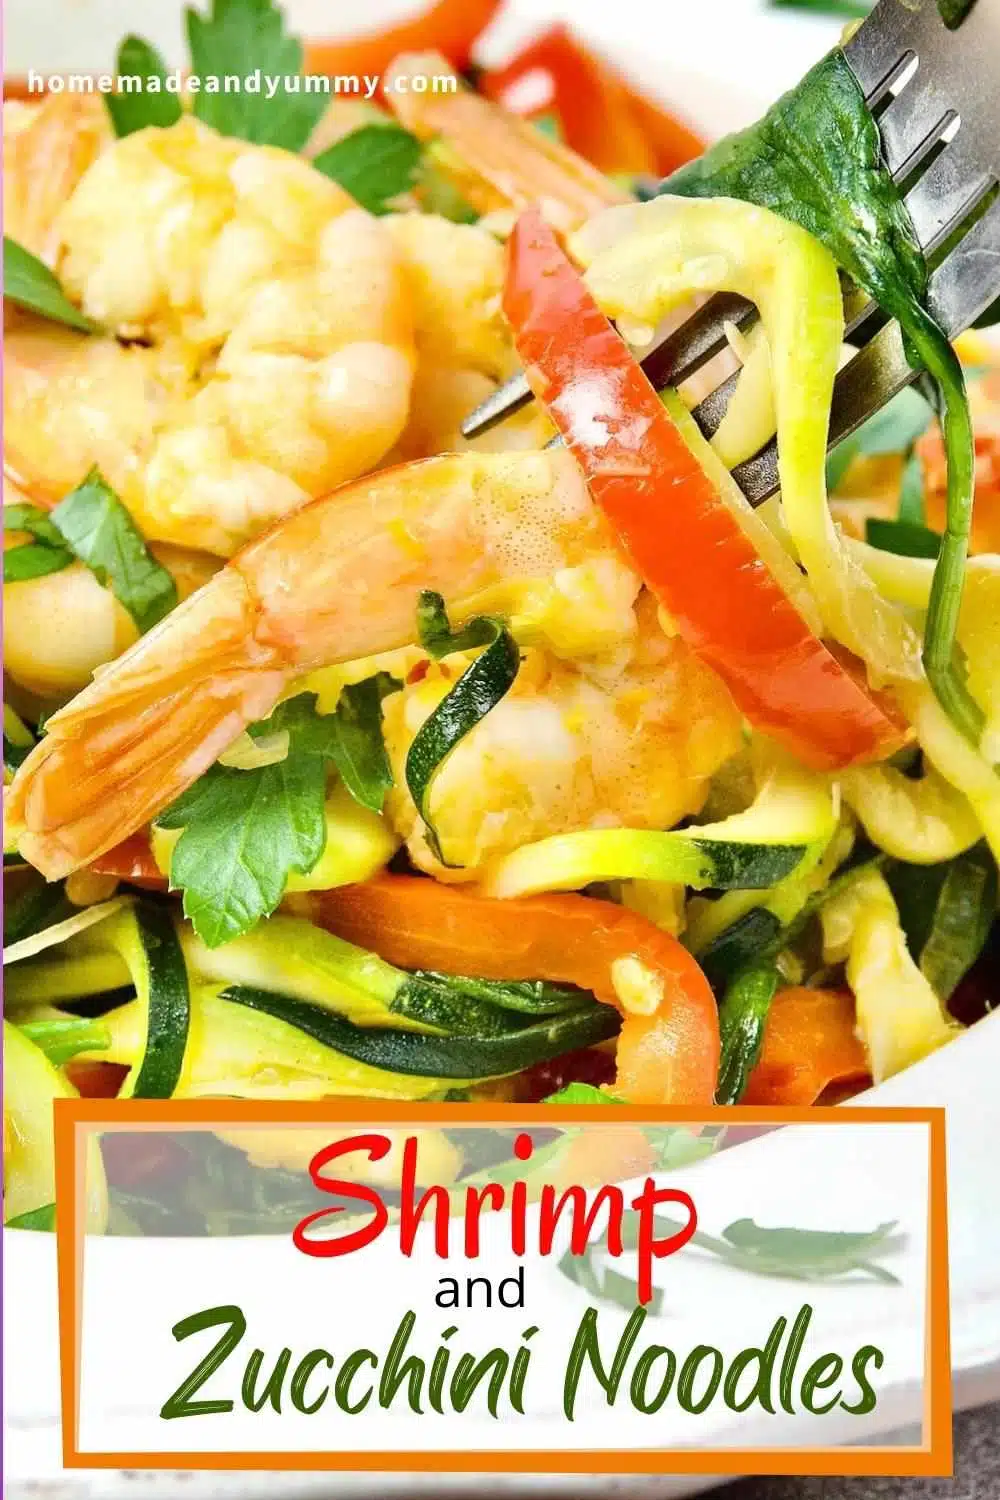 Shrimp and Zucchini Noodles pin image.